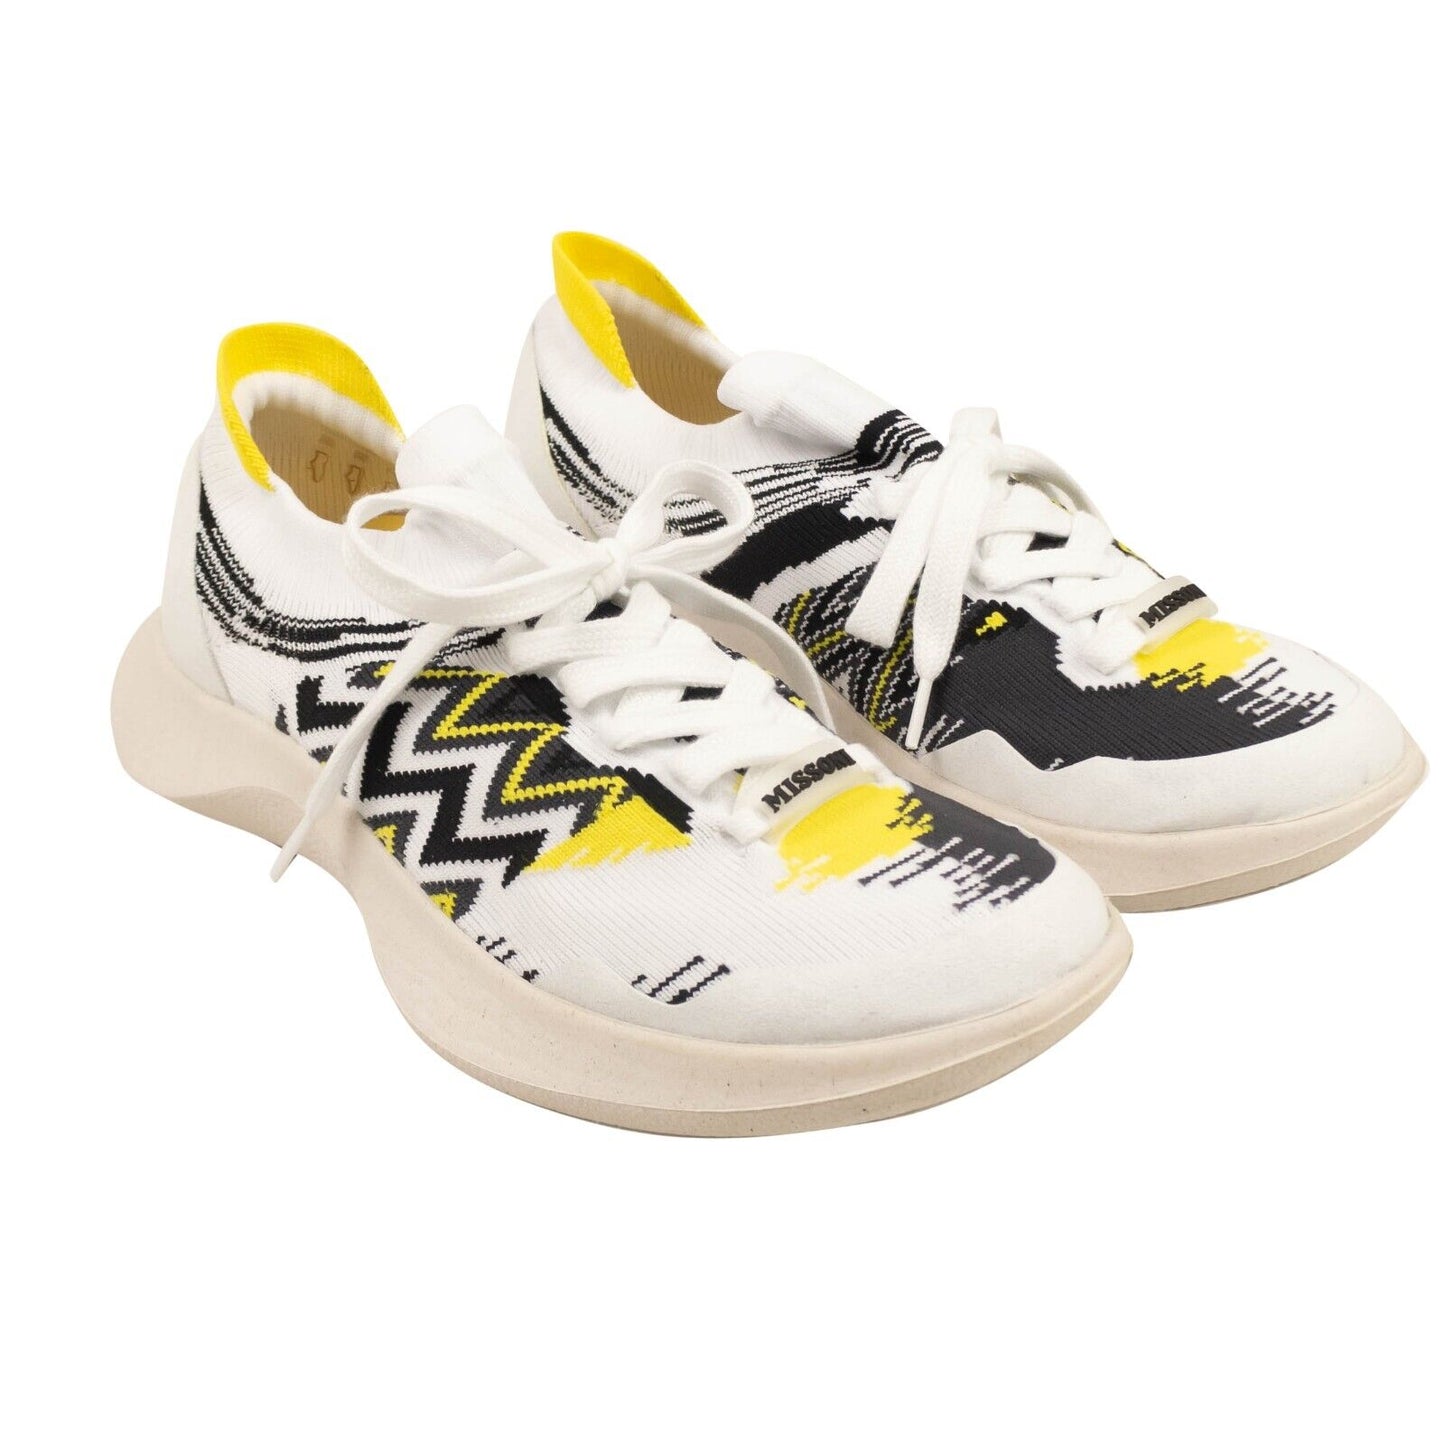 Missoni Acbc"" Fly Knit Sneakers - White/Black